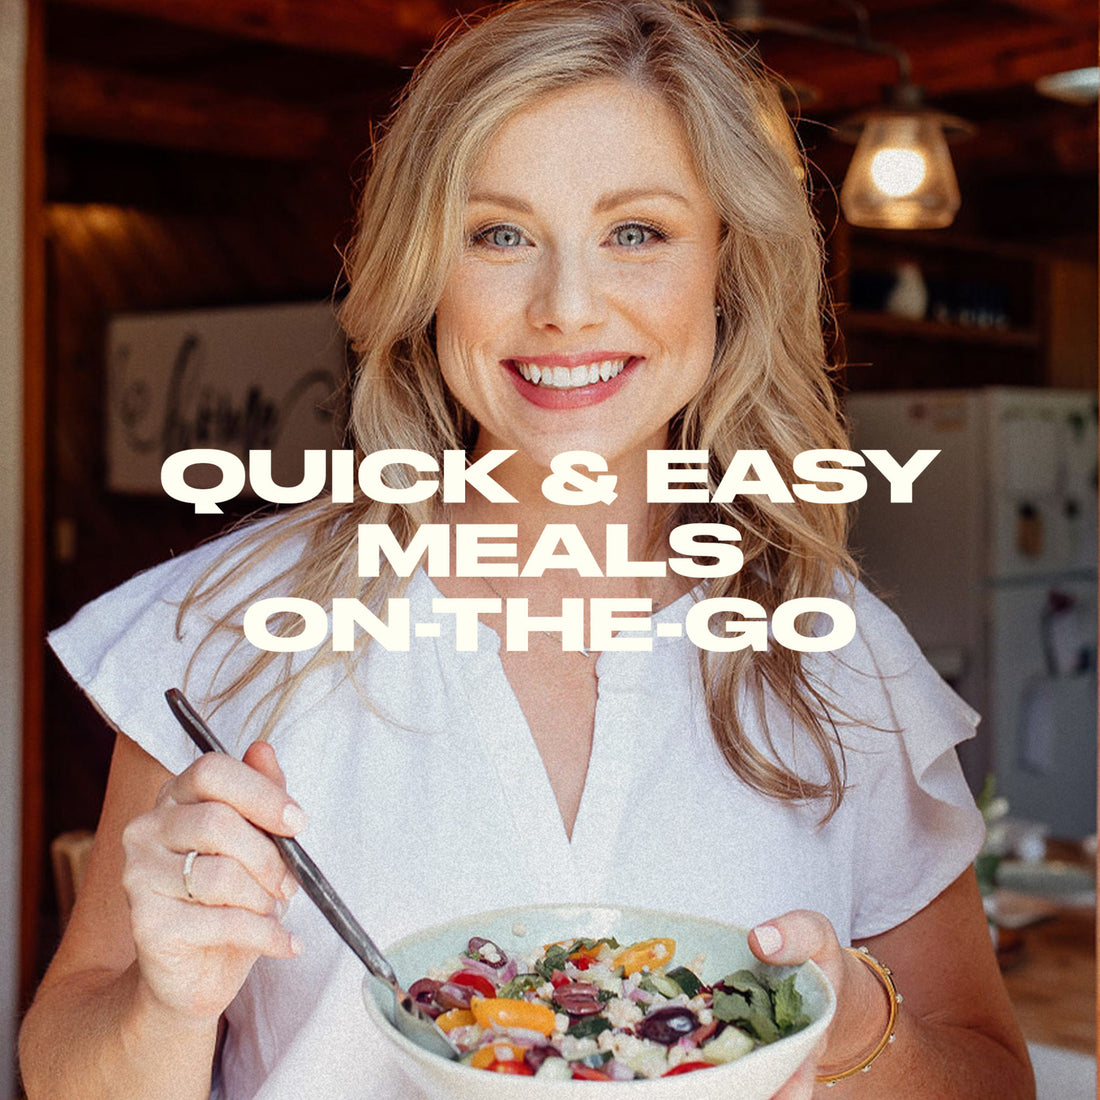 Quick & Easy Meals On-The-Go